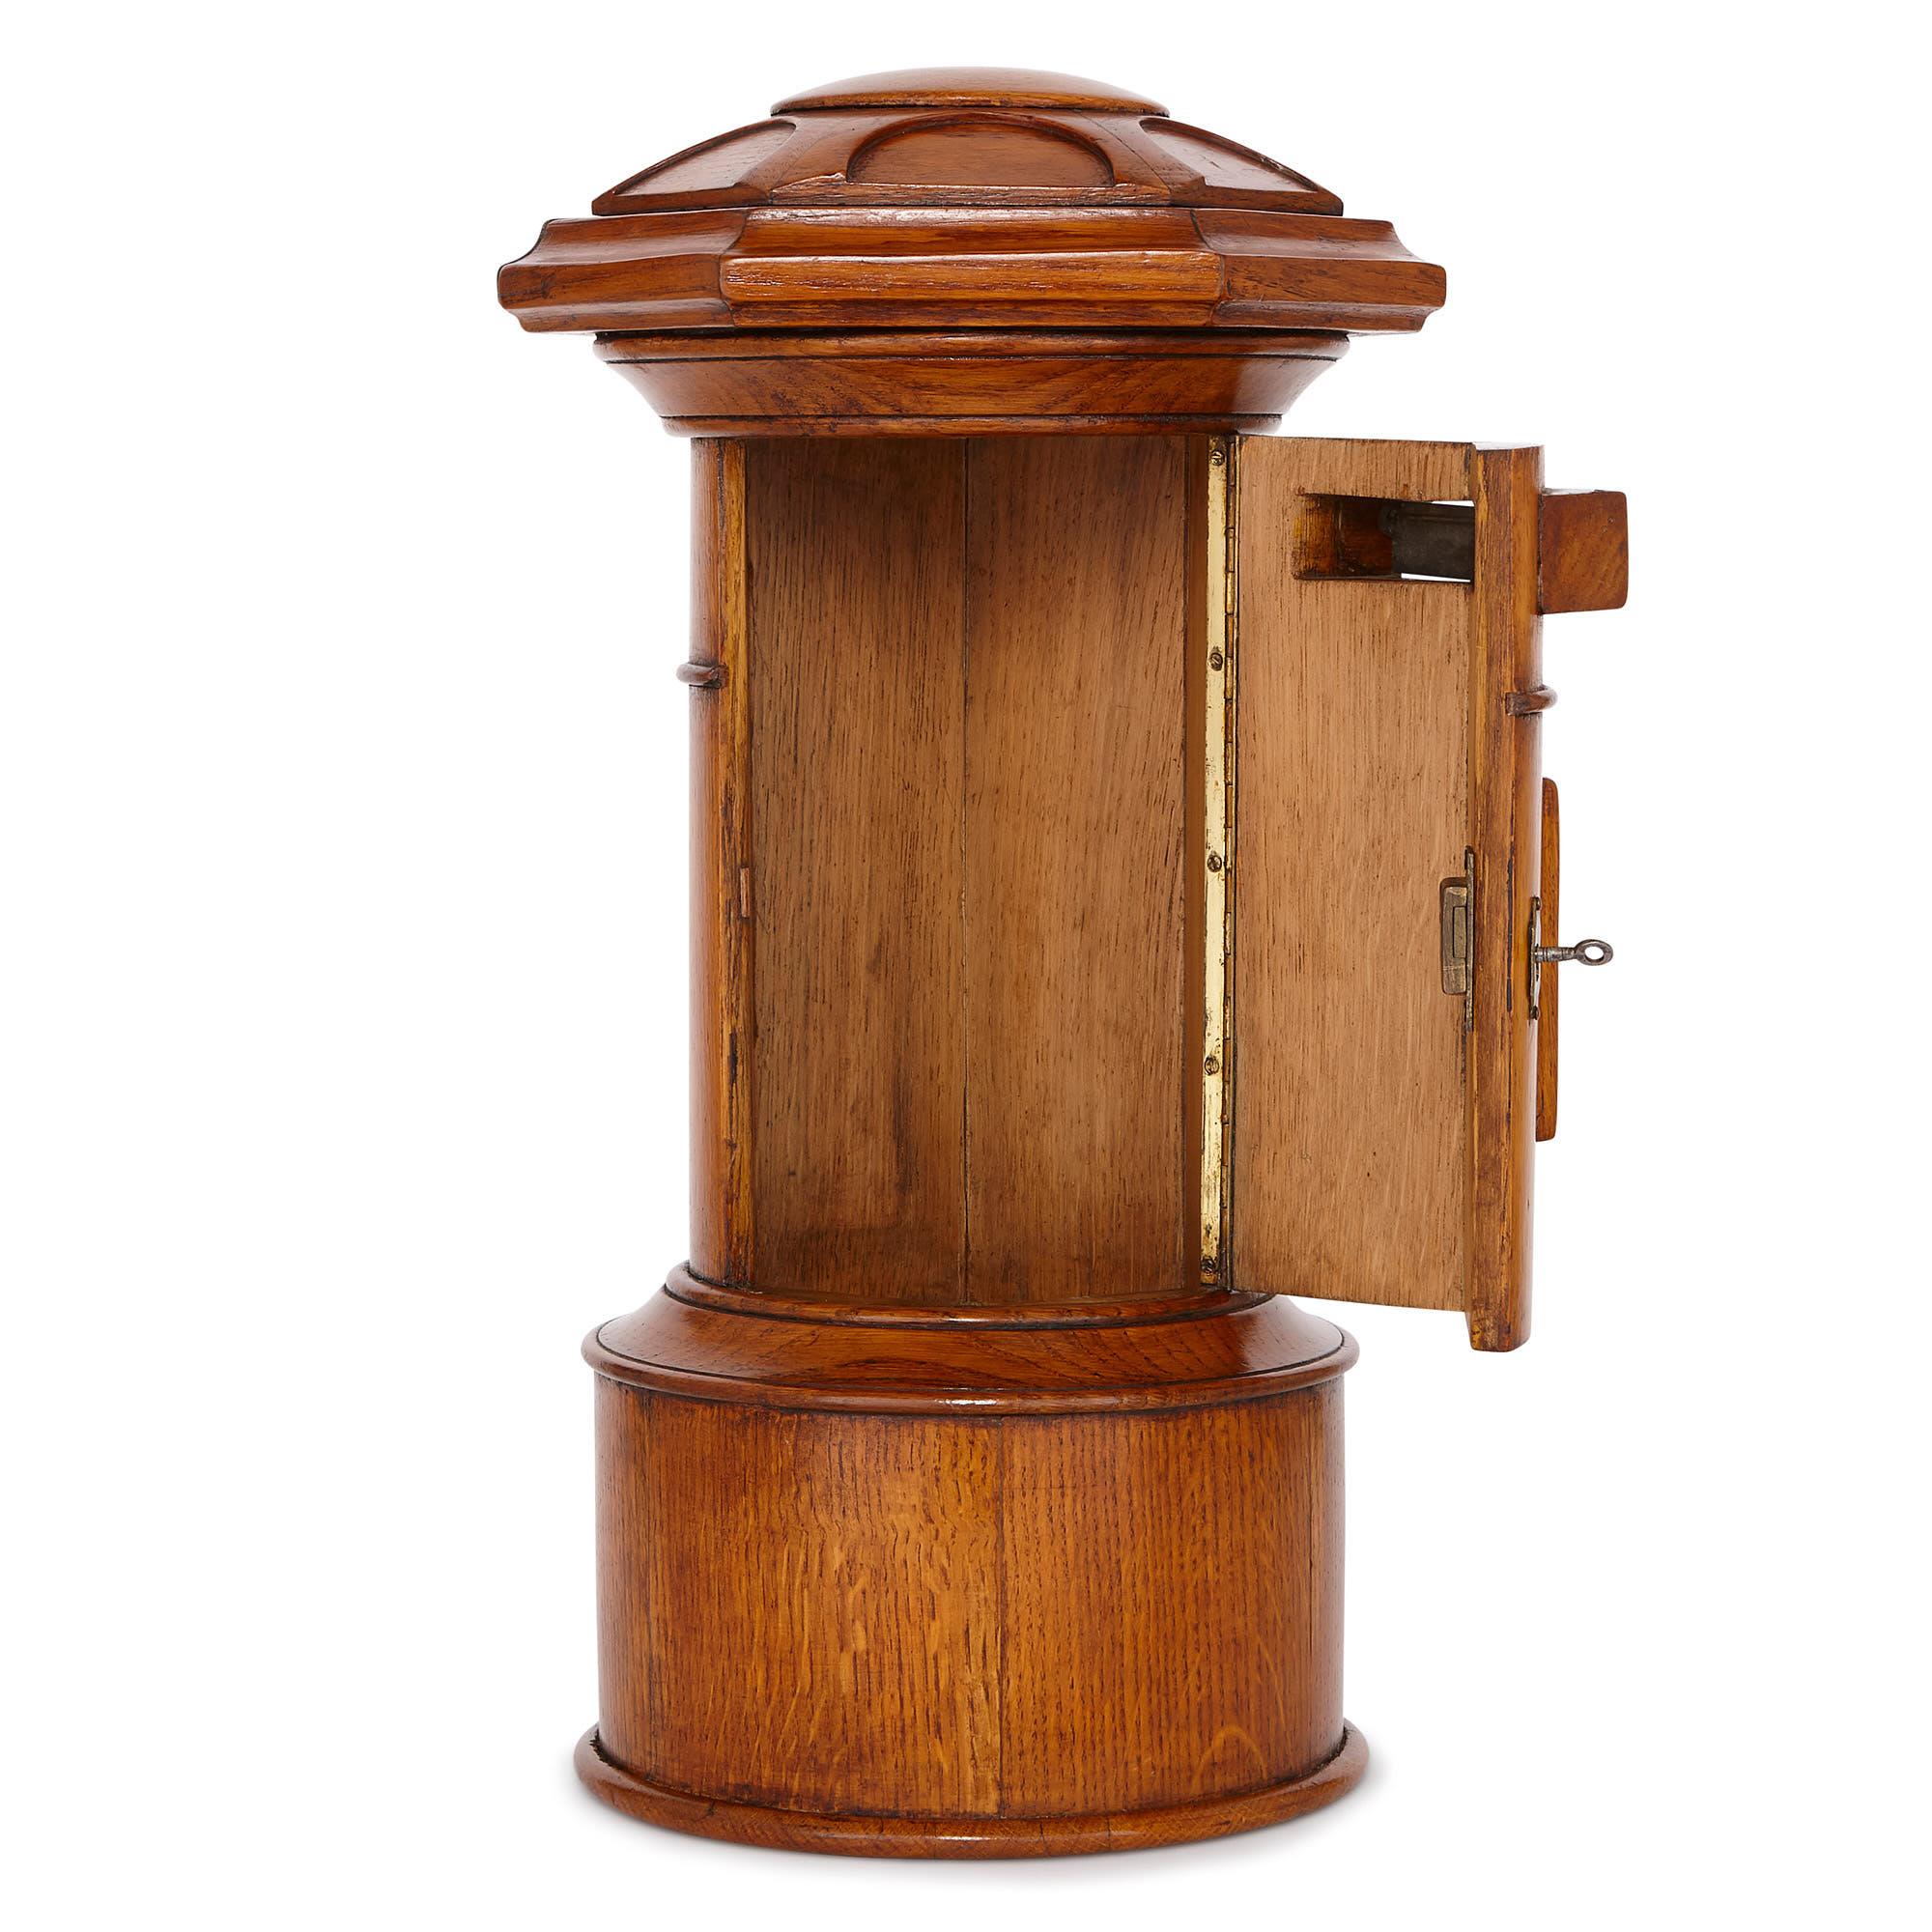 This small, oak pillar letter box was crafted in England in the early 20th century. It is likely the piece was created for a country house, where it would be used to store letters before a servant collected and delivered them to the post office to